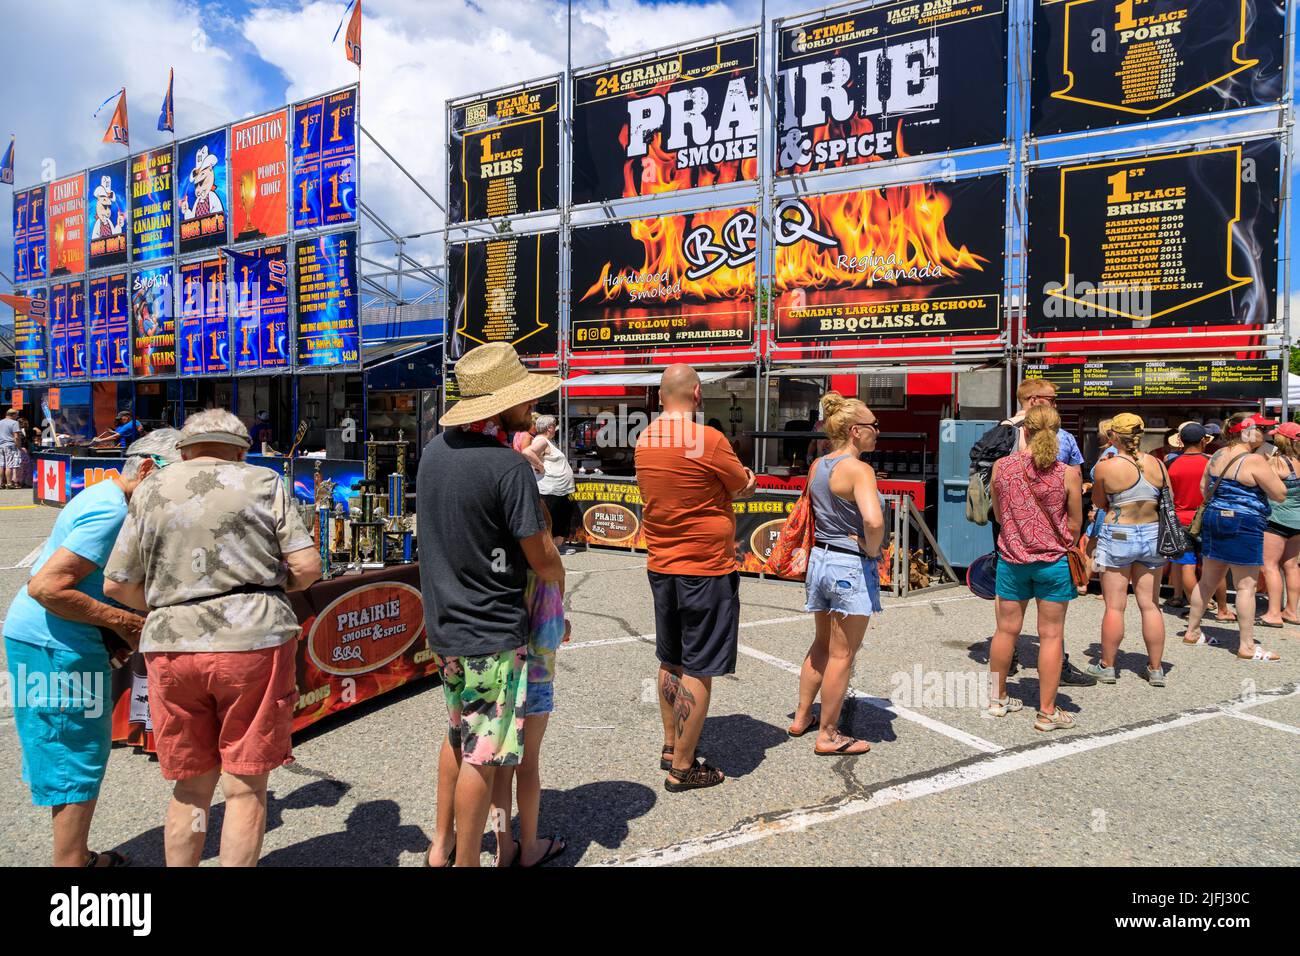 Penticton, British Columbia, Canada - June 30, 2022: Crowds of people at the Penticton Rib Fest where barbecue teams from across Canada compete for be Stock Photo